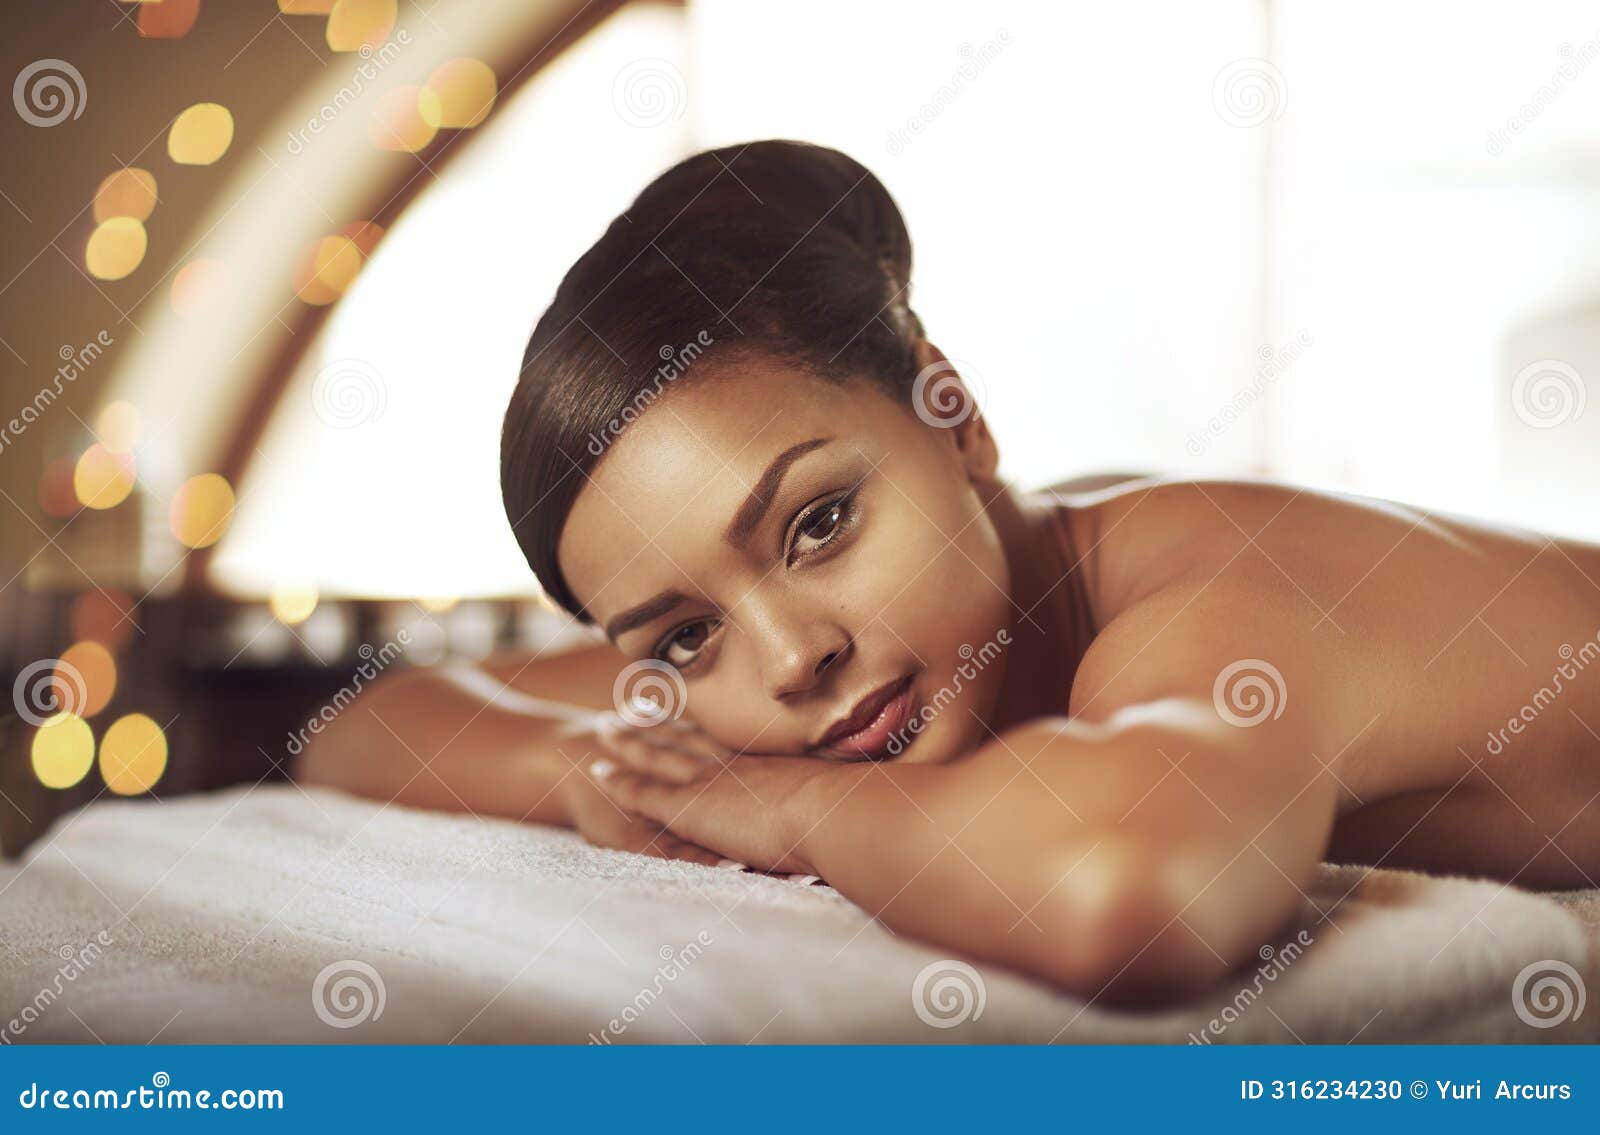 female person, spa and massage in portrait for wellness in thailand, relax and pamper for muscles. woman, beauty and